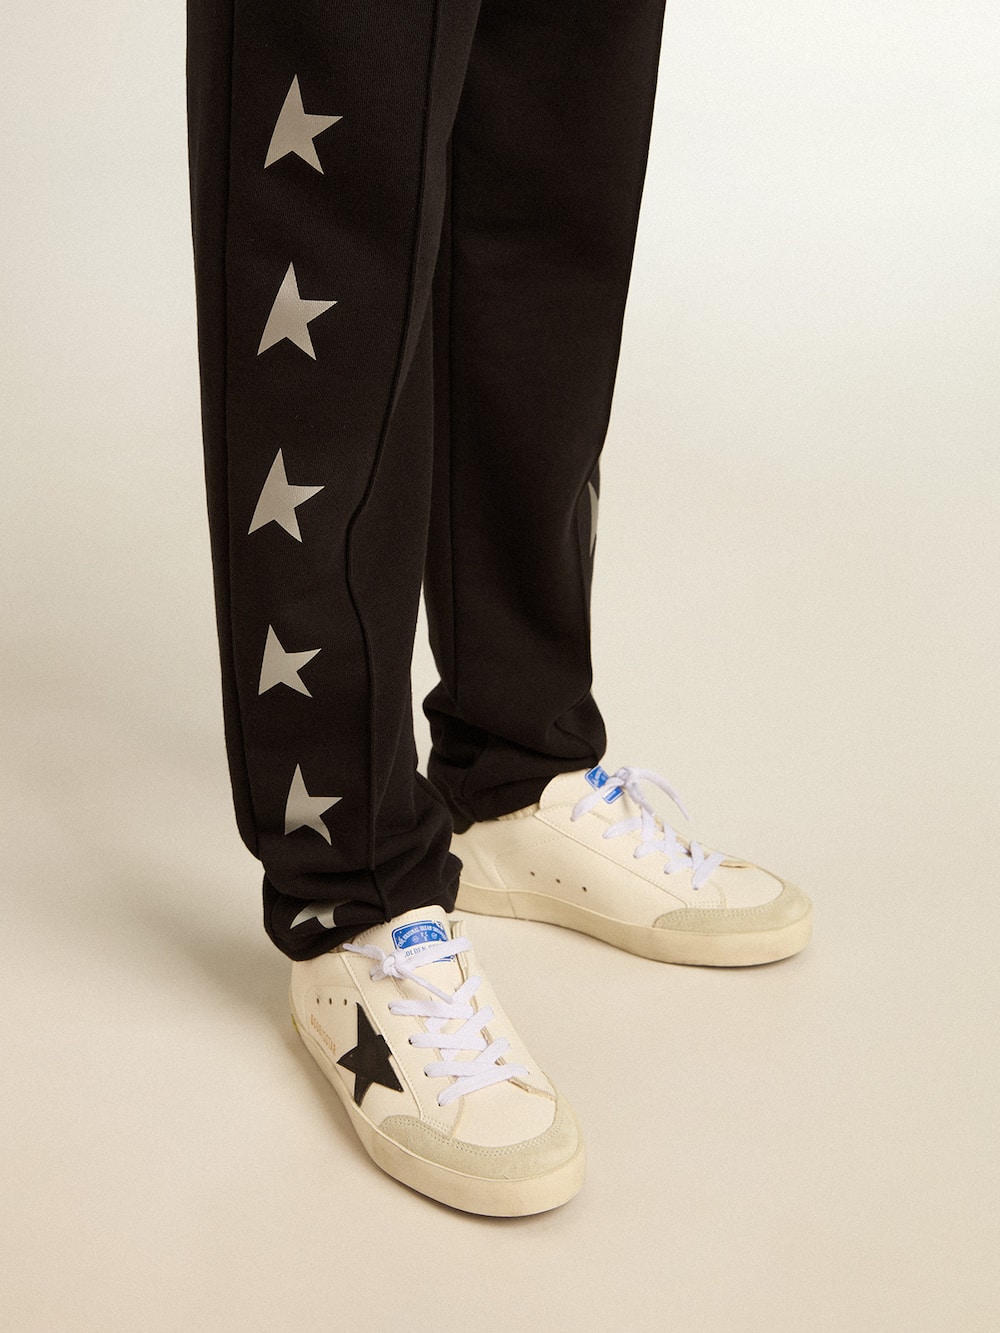 Golden Goose - Boys’ black joggers with white stars  in 